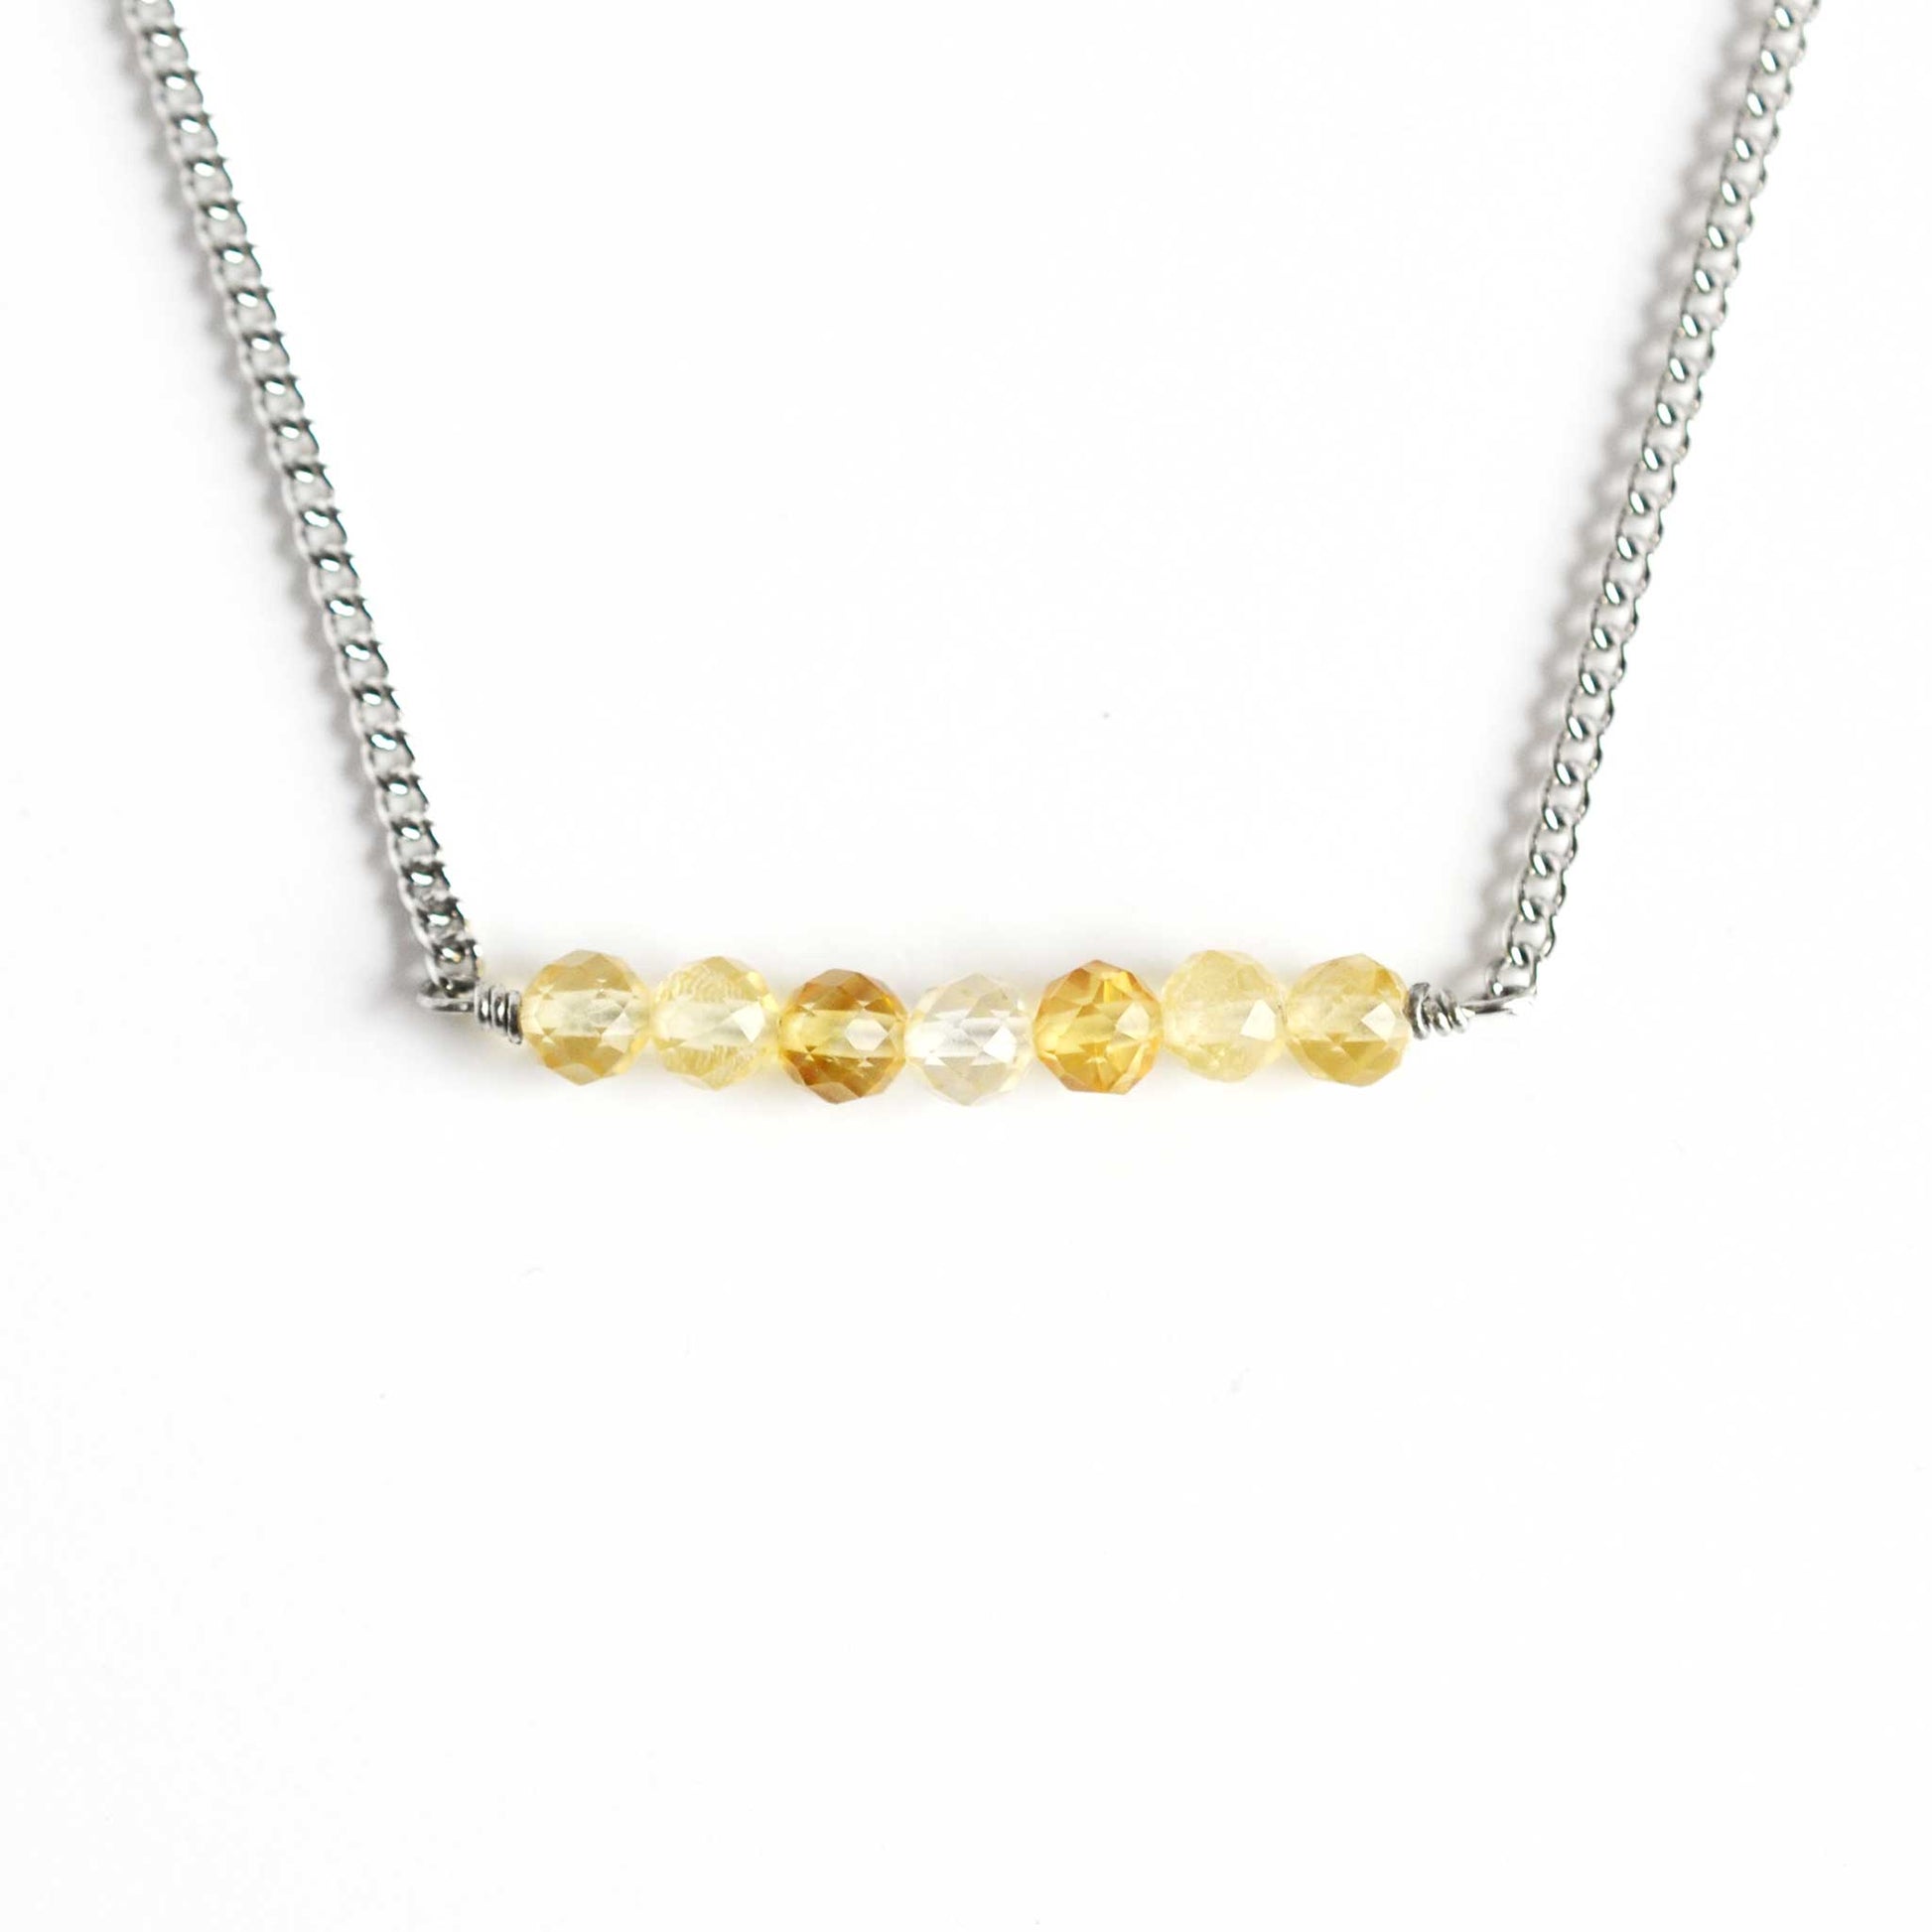 Yellow Citrine crystal necklace on hypoallergenic stainless steel chain